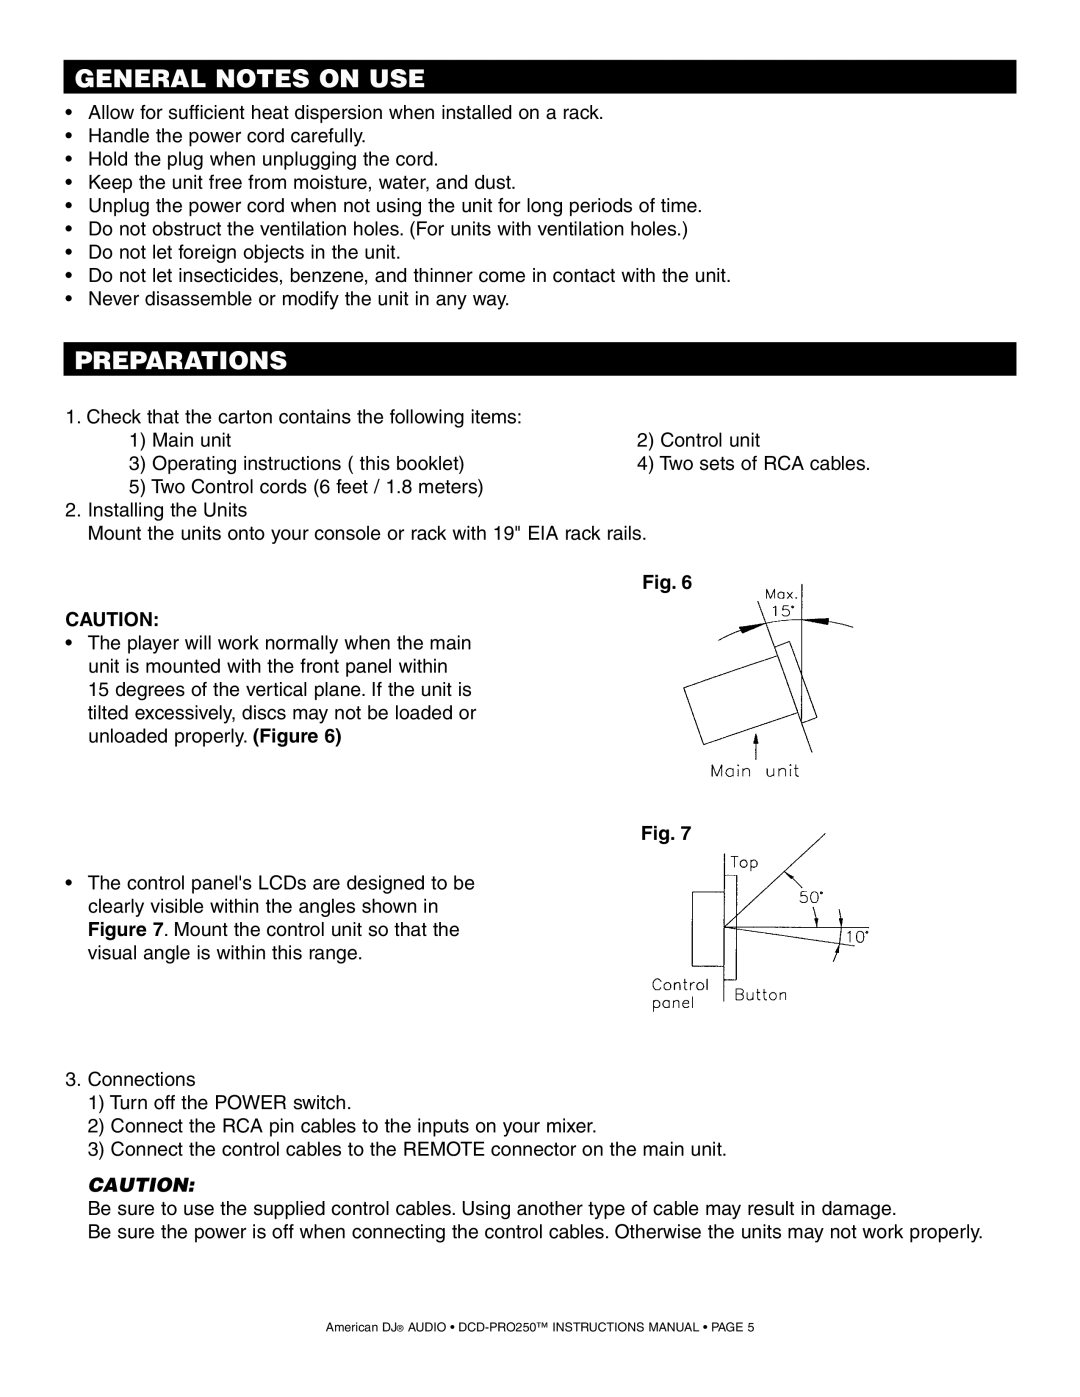 American Audio DCD PRO 250 manual General Notes On Use, Preparations 